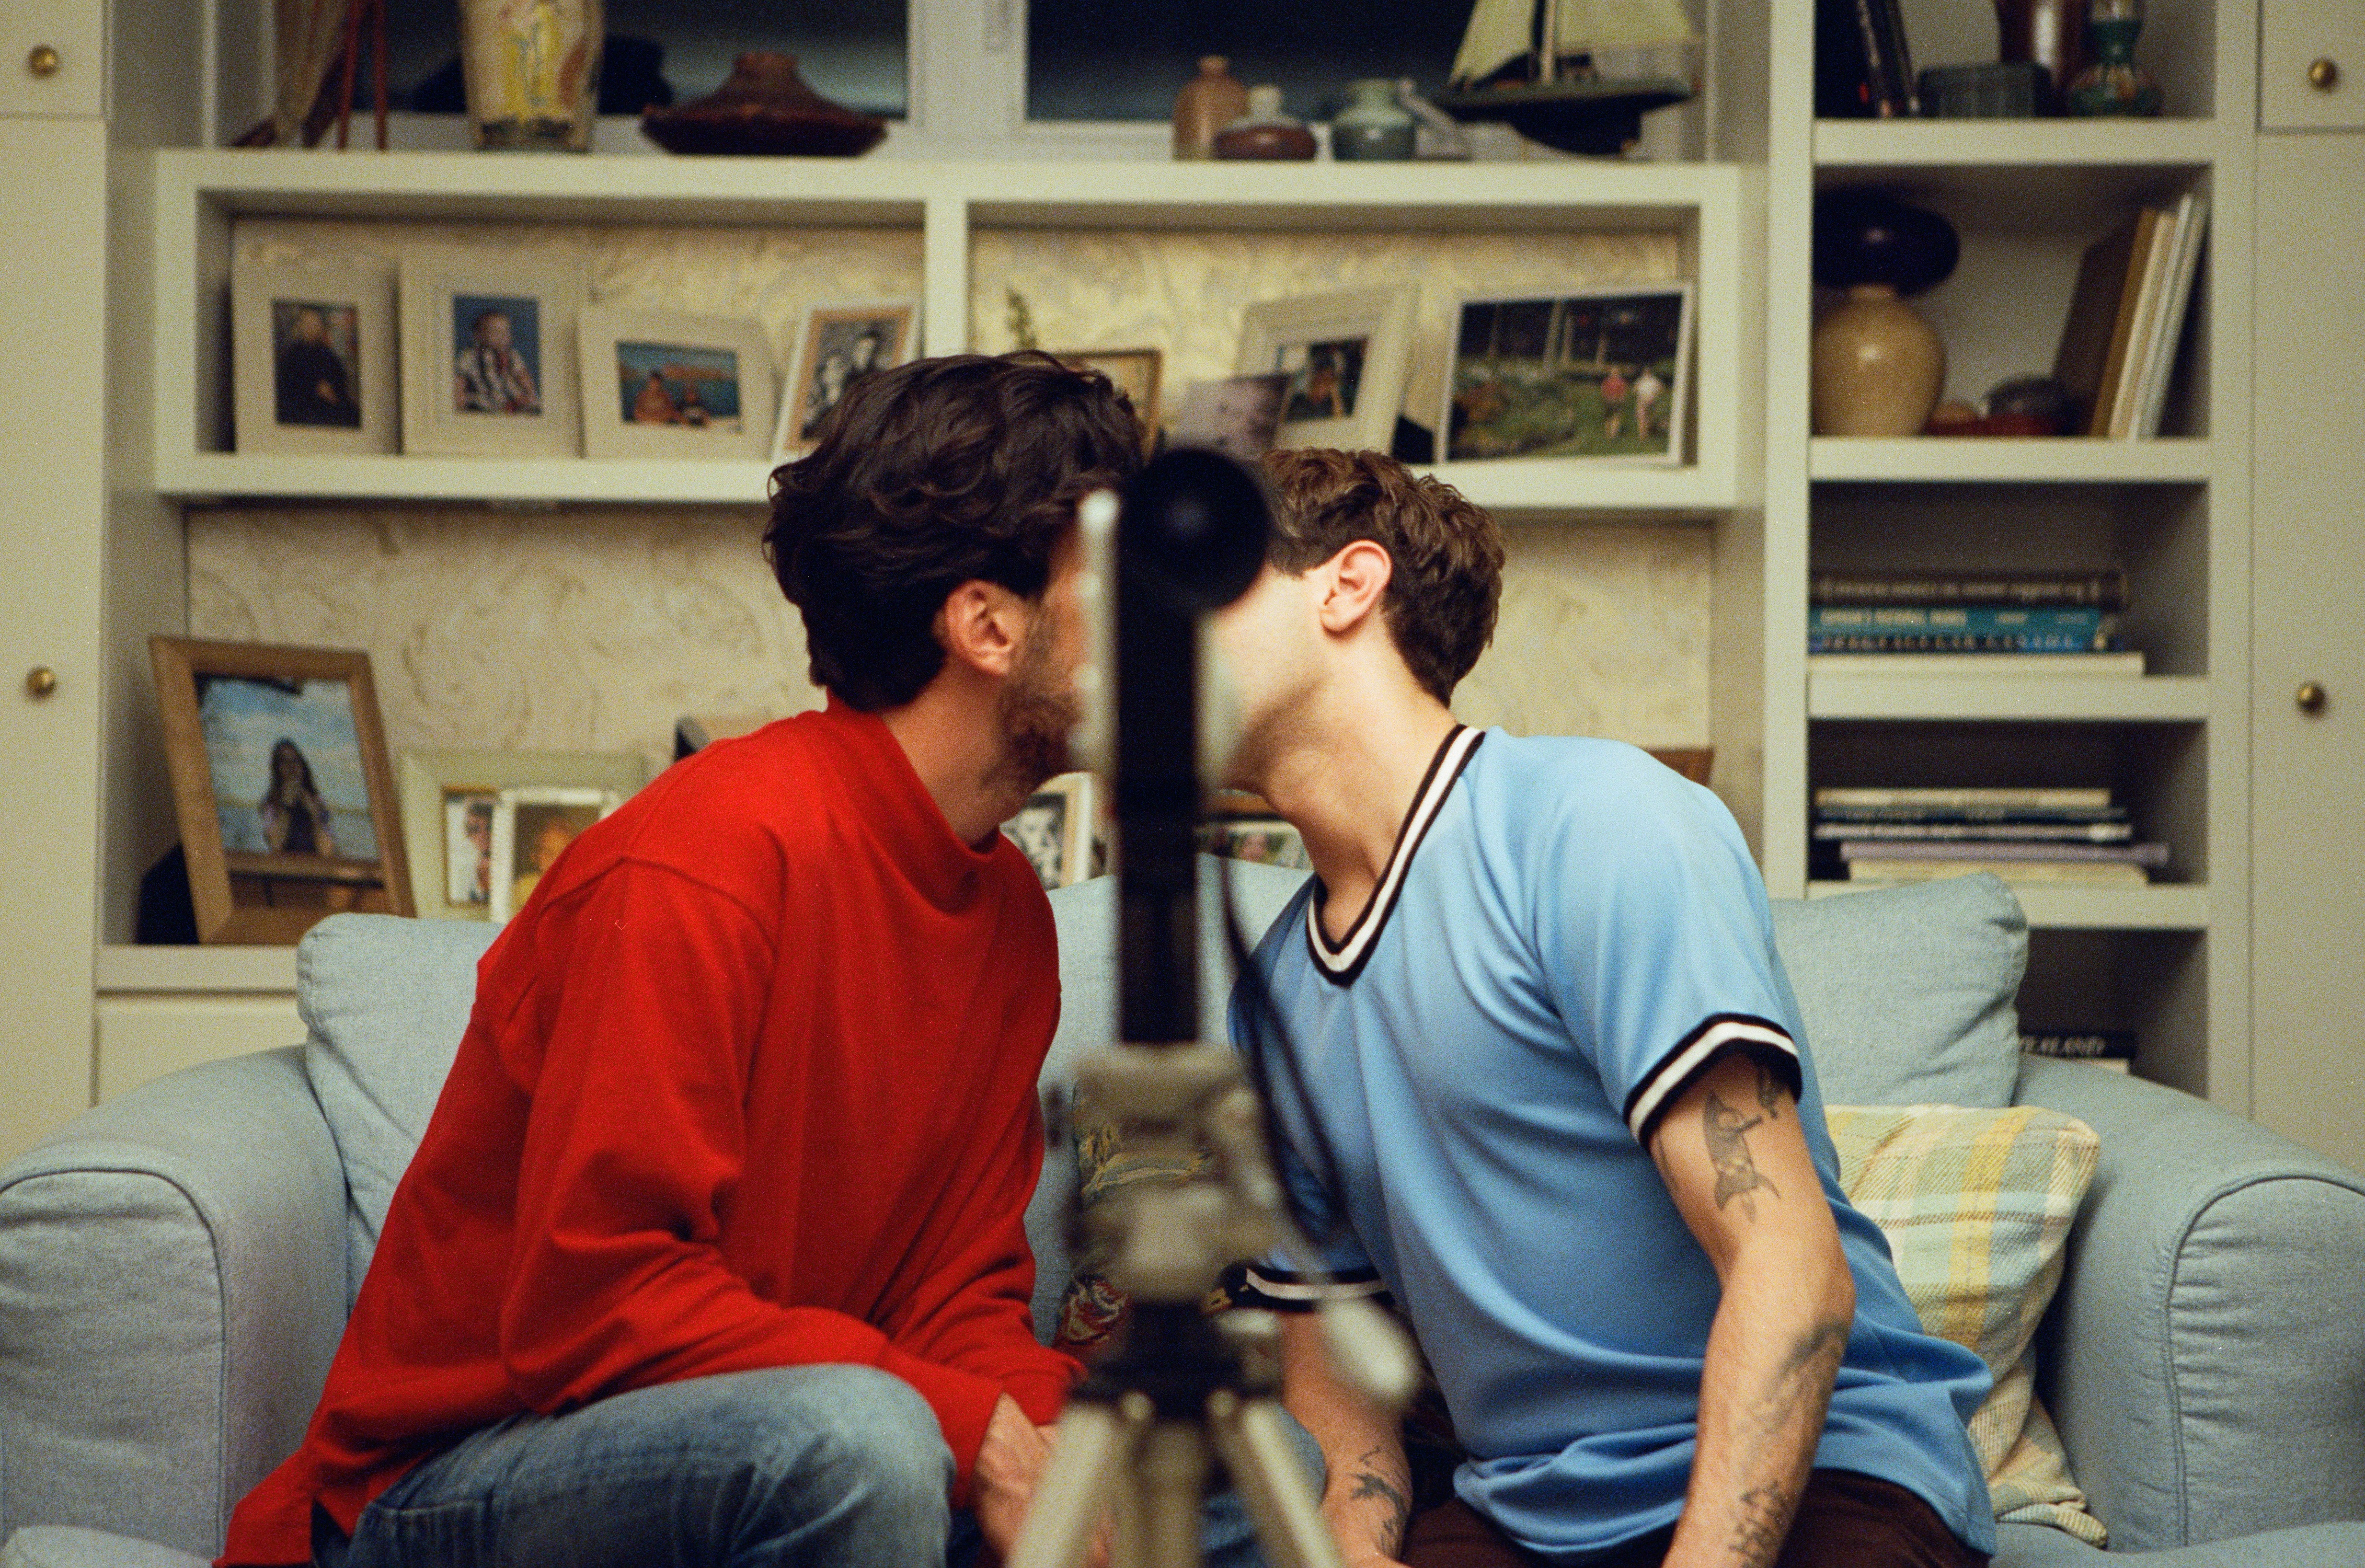 A conversation with Xavier Dolan, the director and actor featured